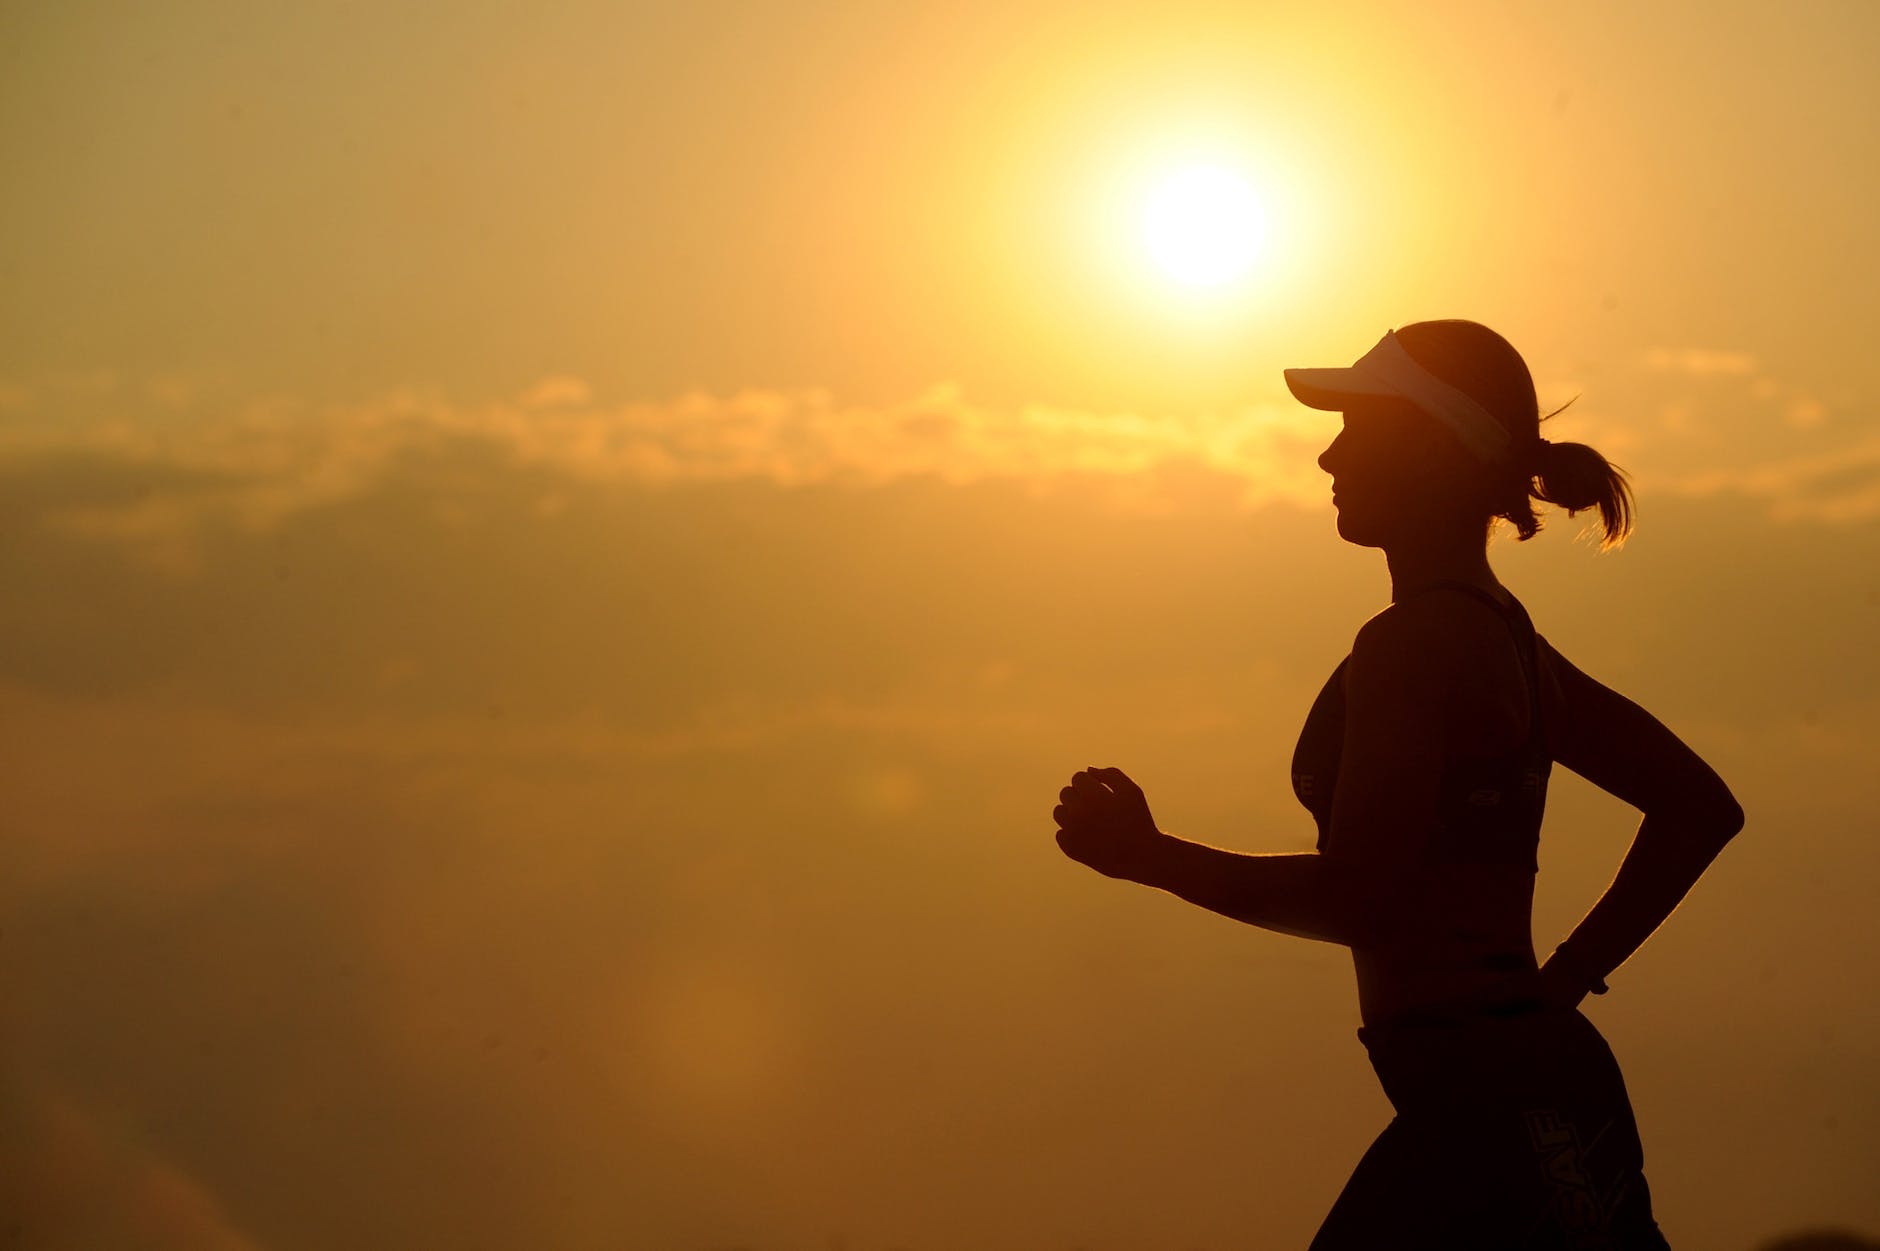 Woman runner silhouetted against a sunset